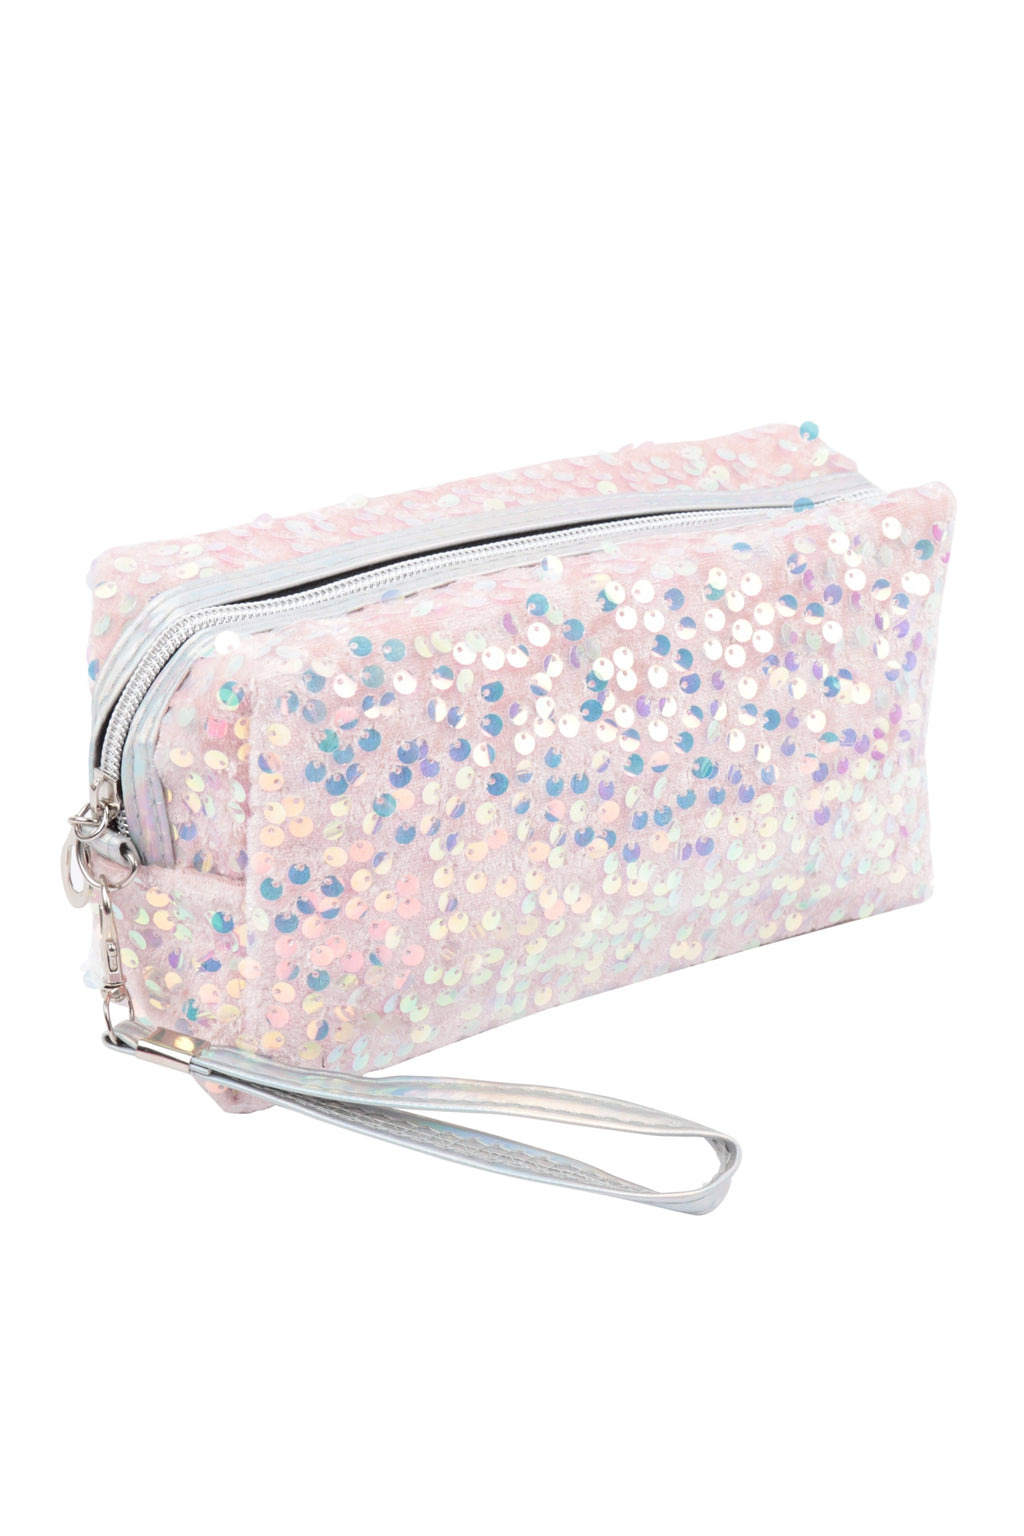 Sequin Glitter Cosmetic Pouch Pink - Pack of 6